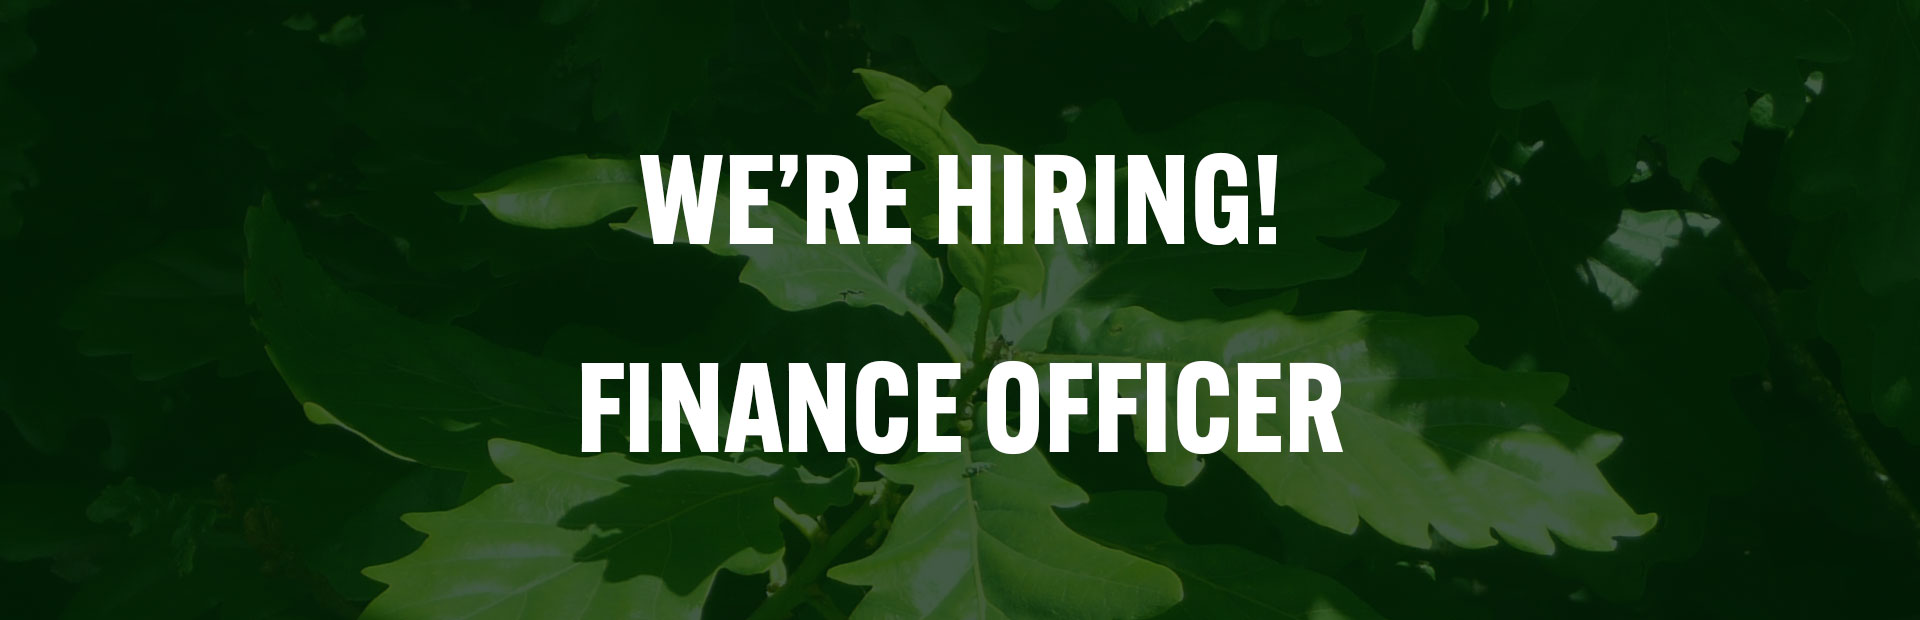 NEW VACANCY for a Finance Officer!